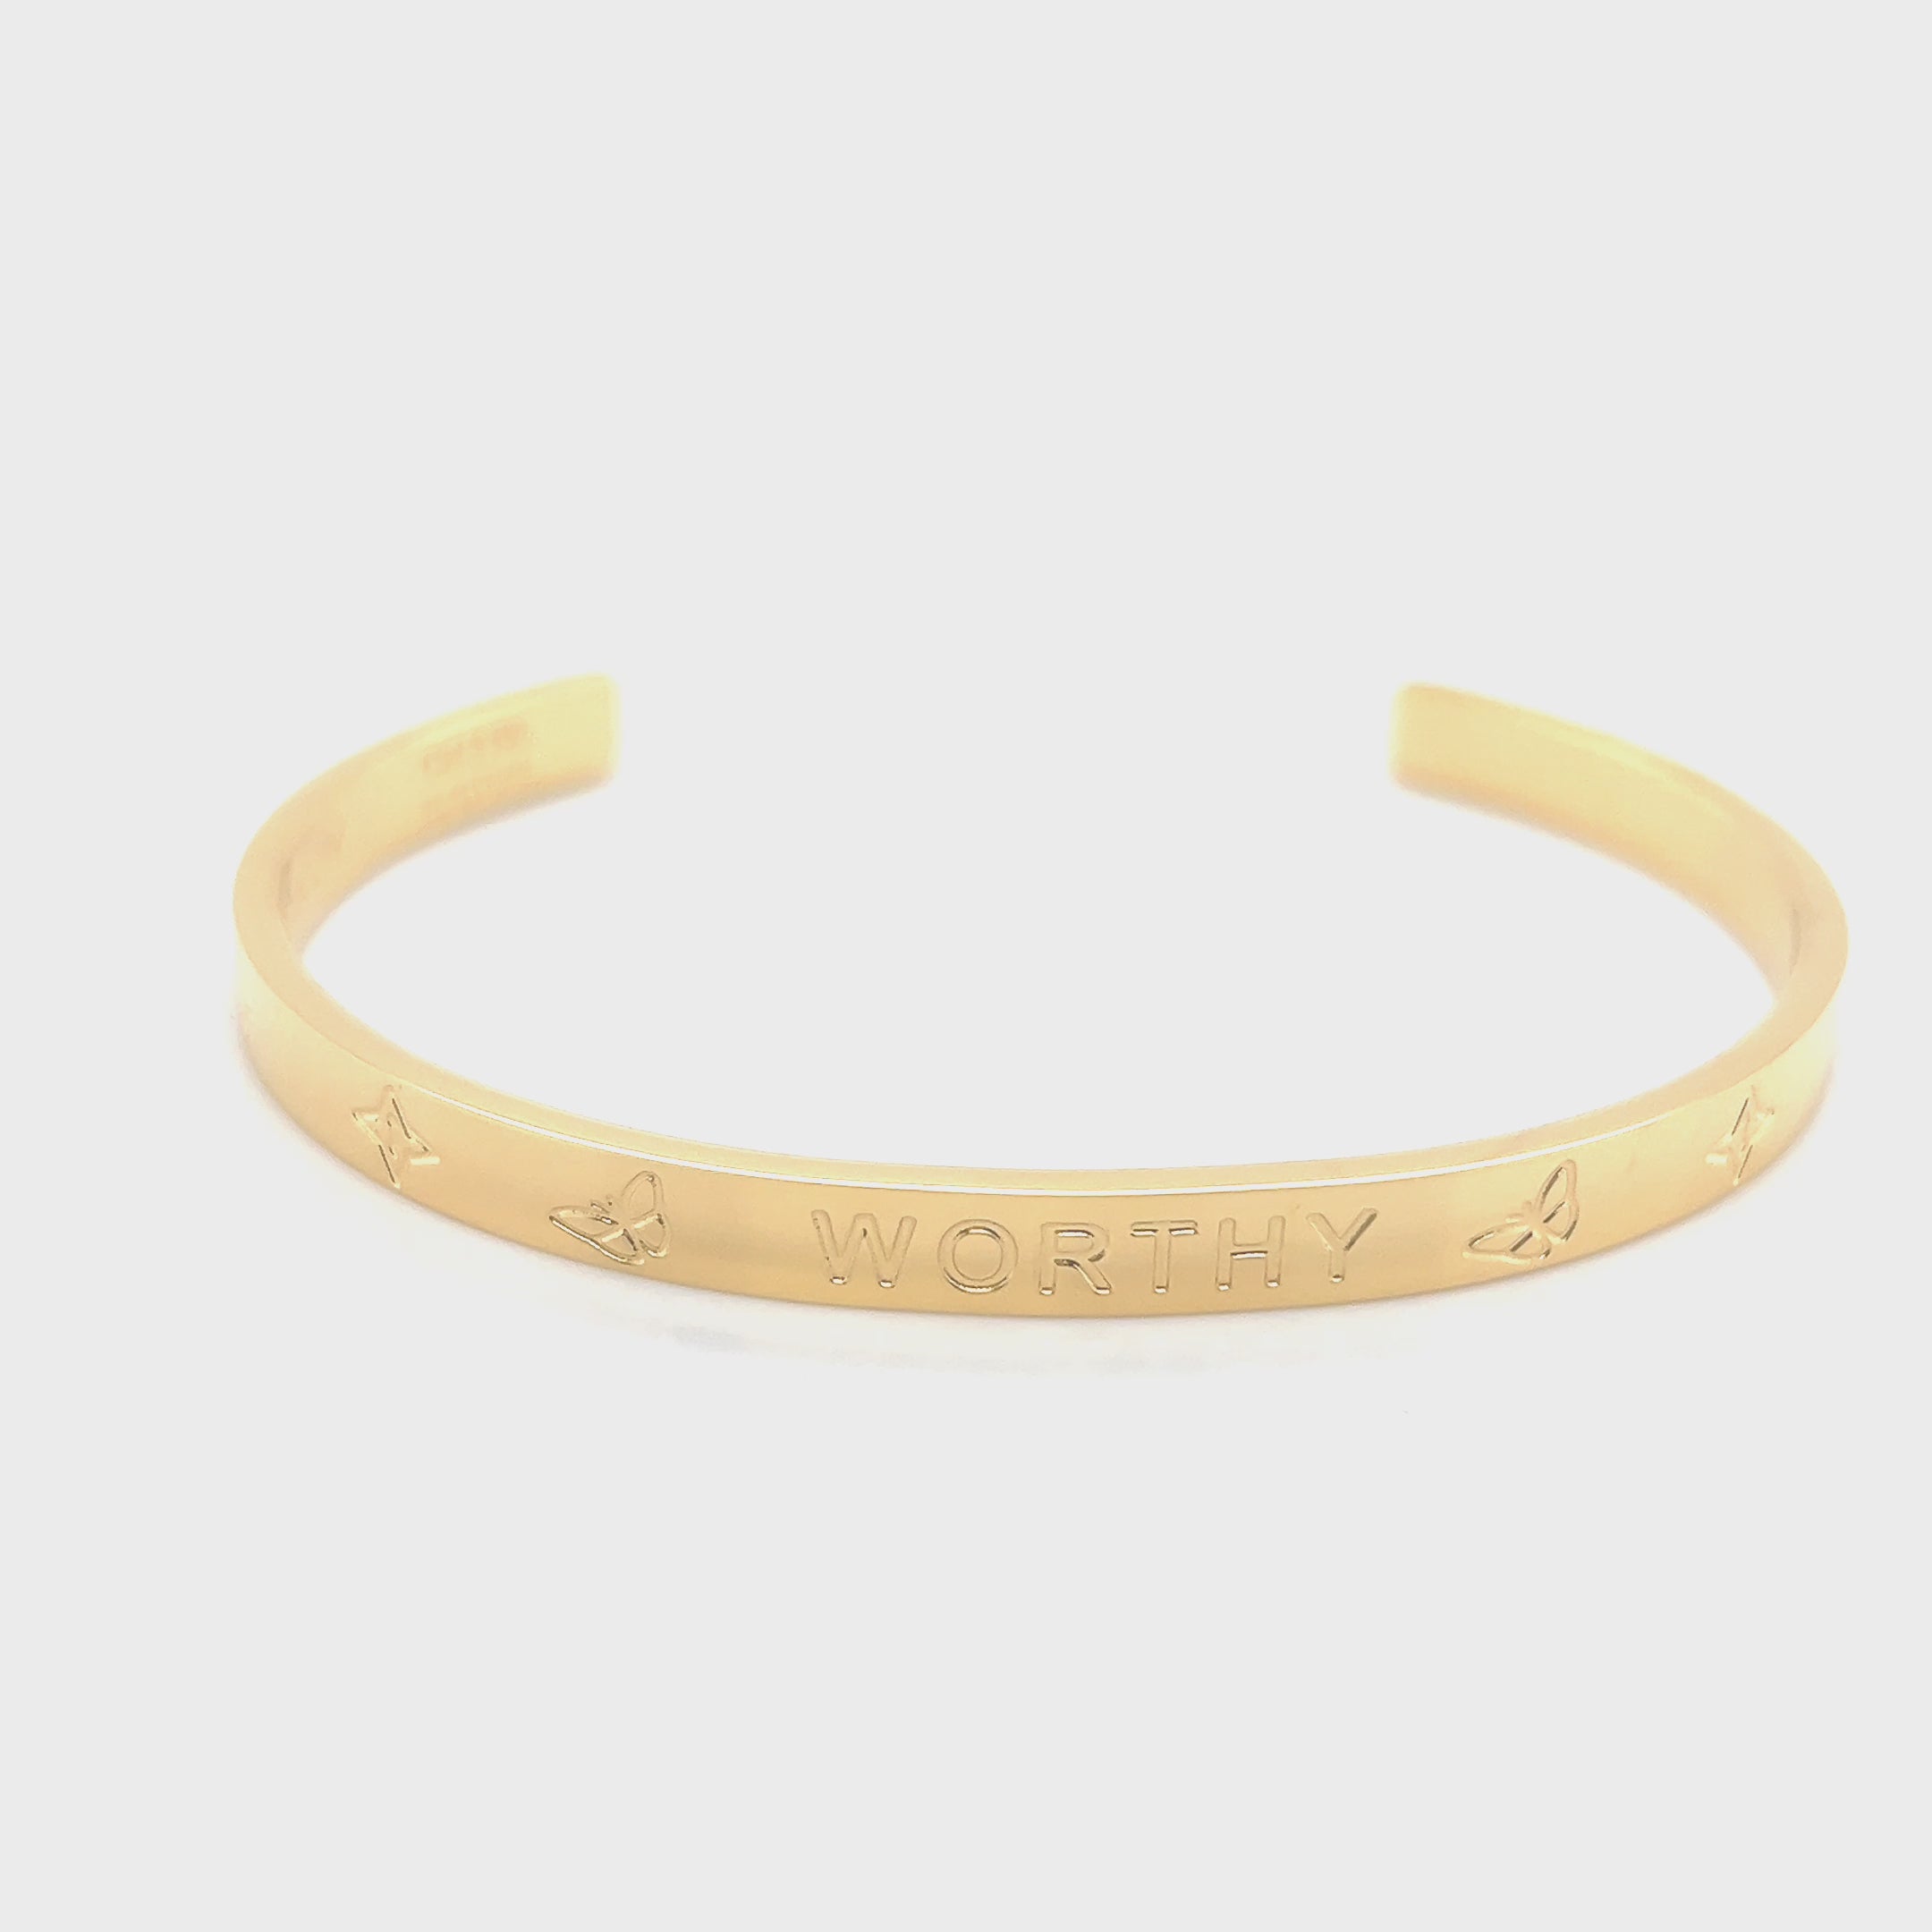 Beloved Adjustable Bracelet in Gold and Silver – AMADI Jewelry